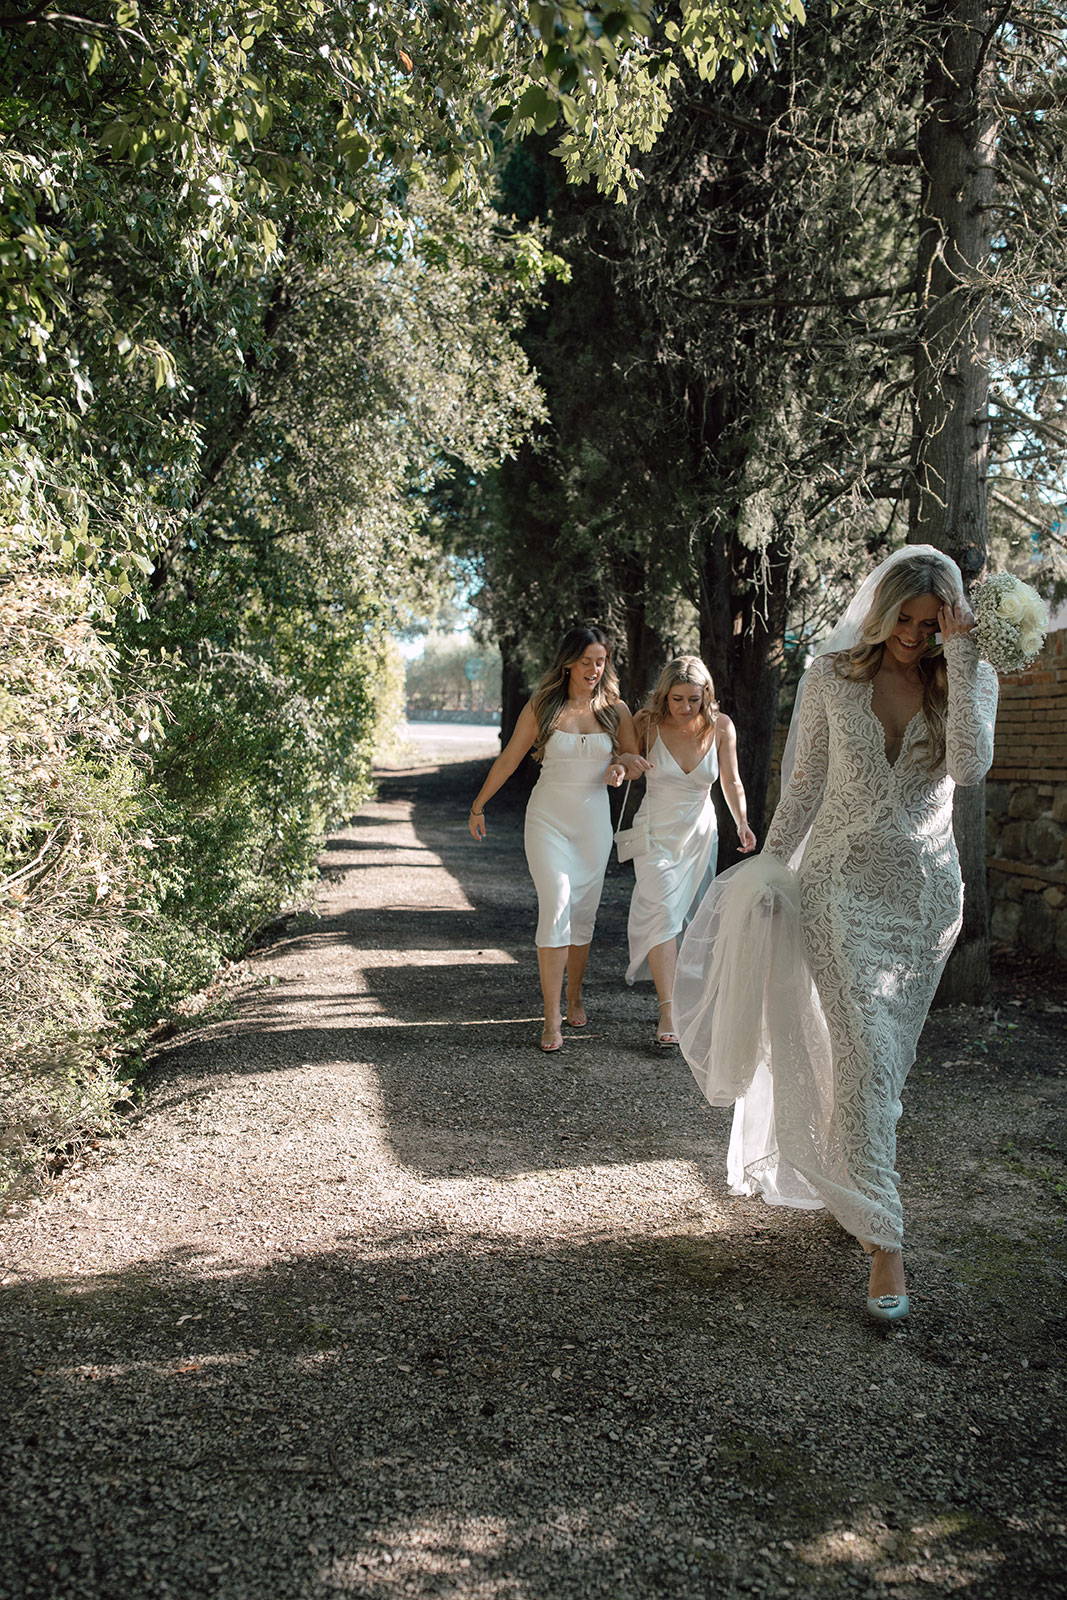 Bride with Bridesmaids amongst forest trees